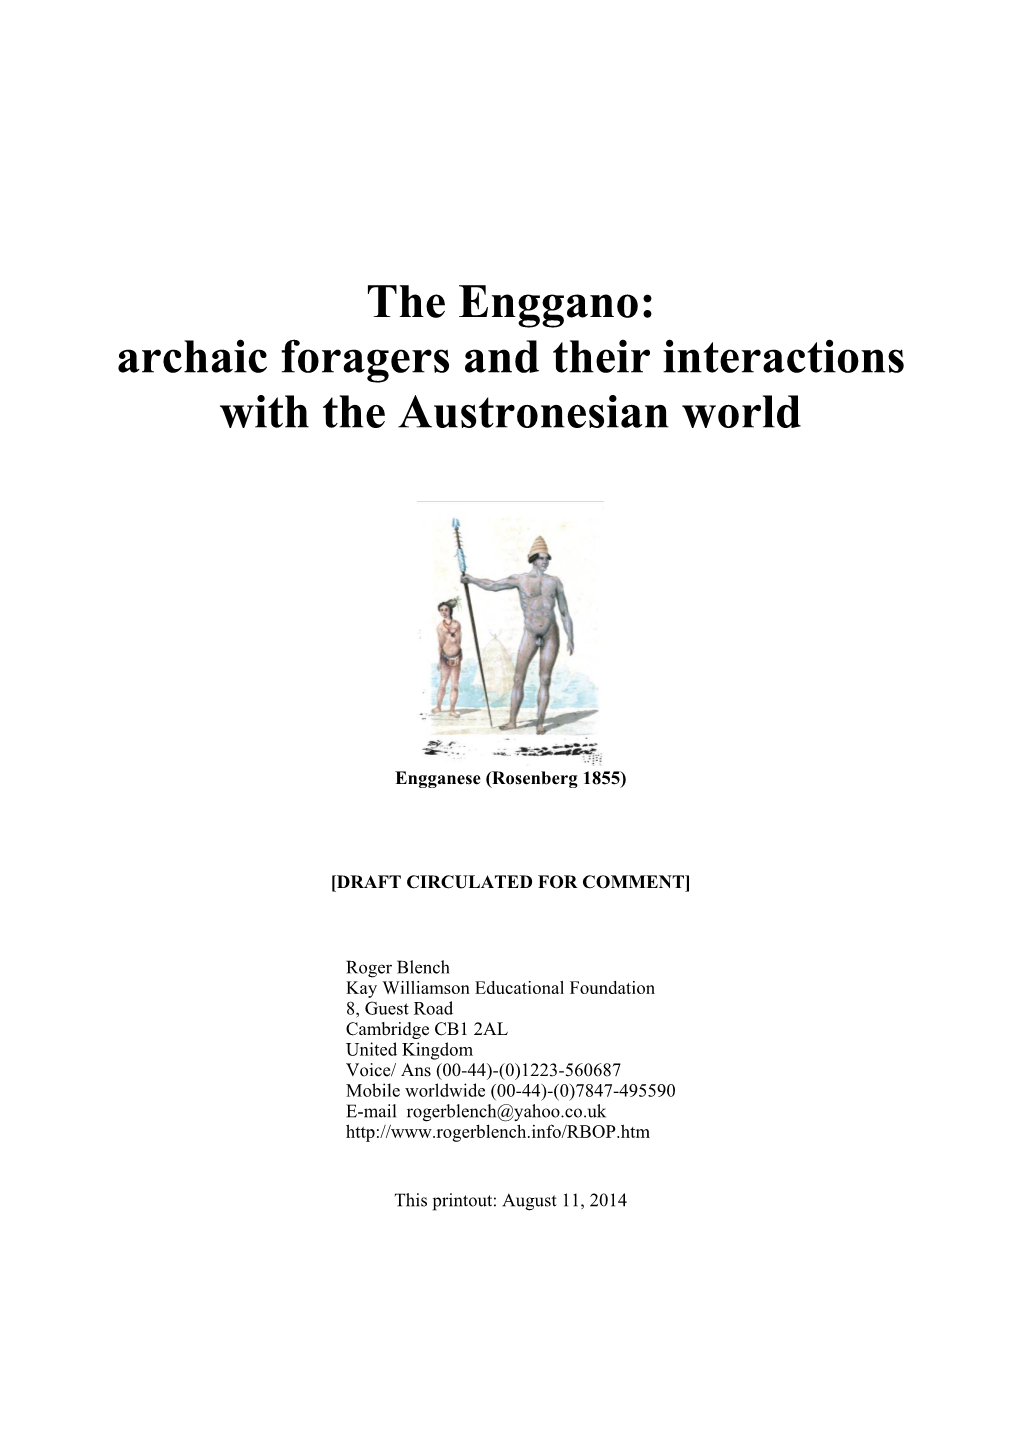 The Enggano: Archaic Foragers and Their Interactions with the Austronesian World